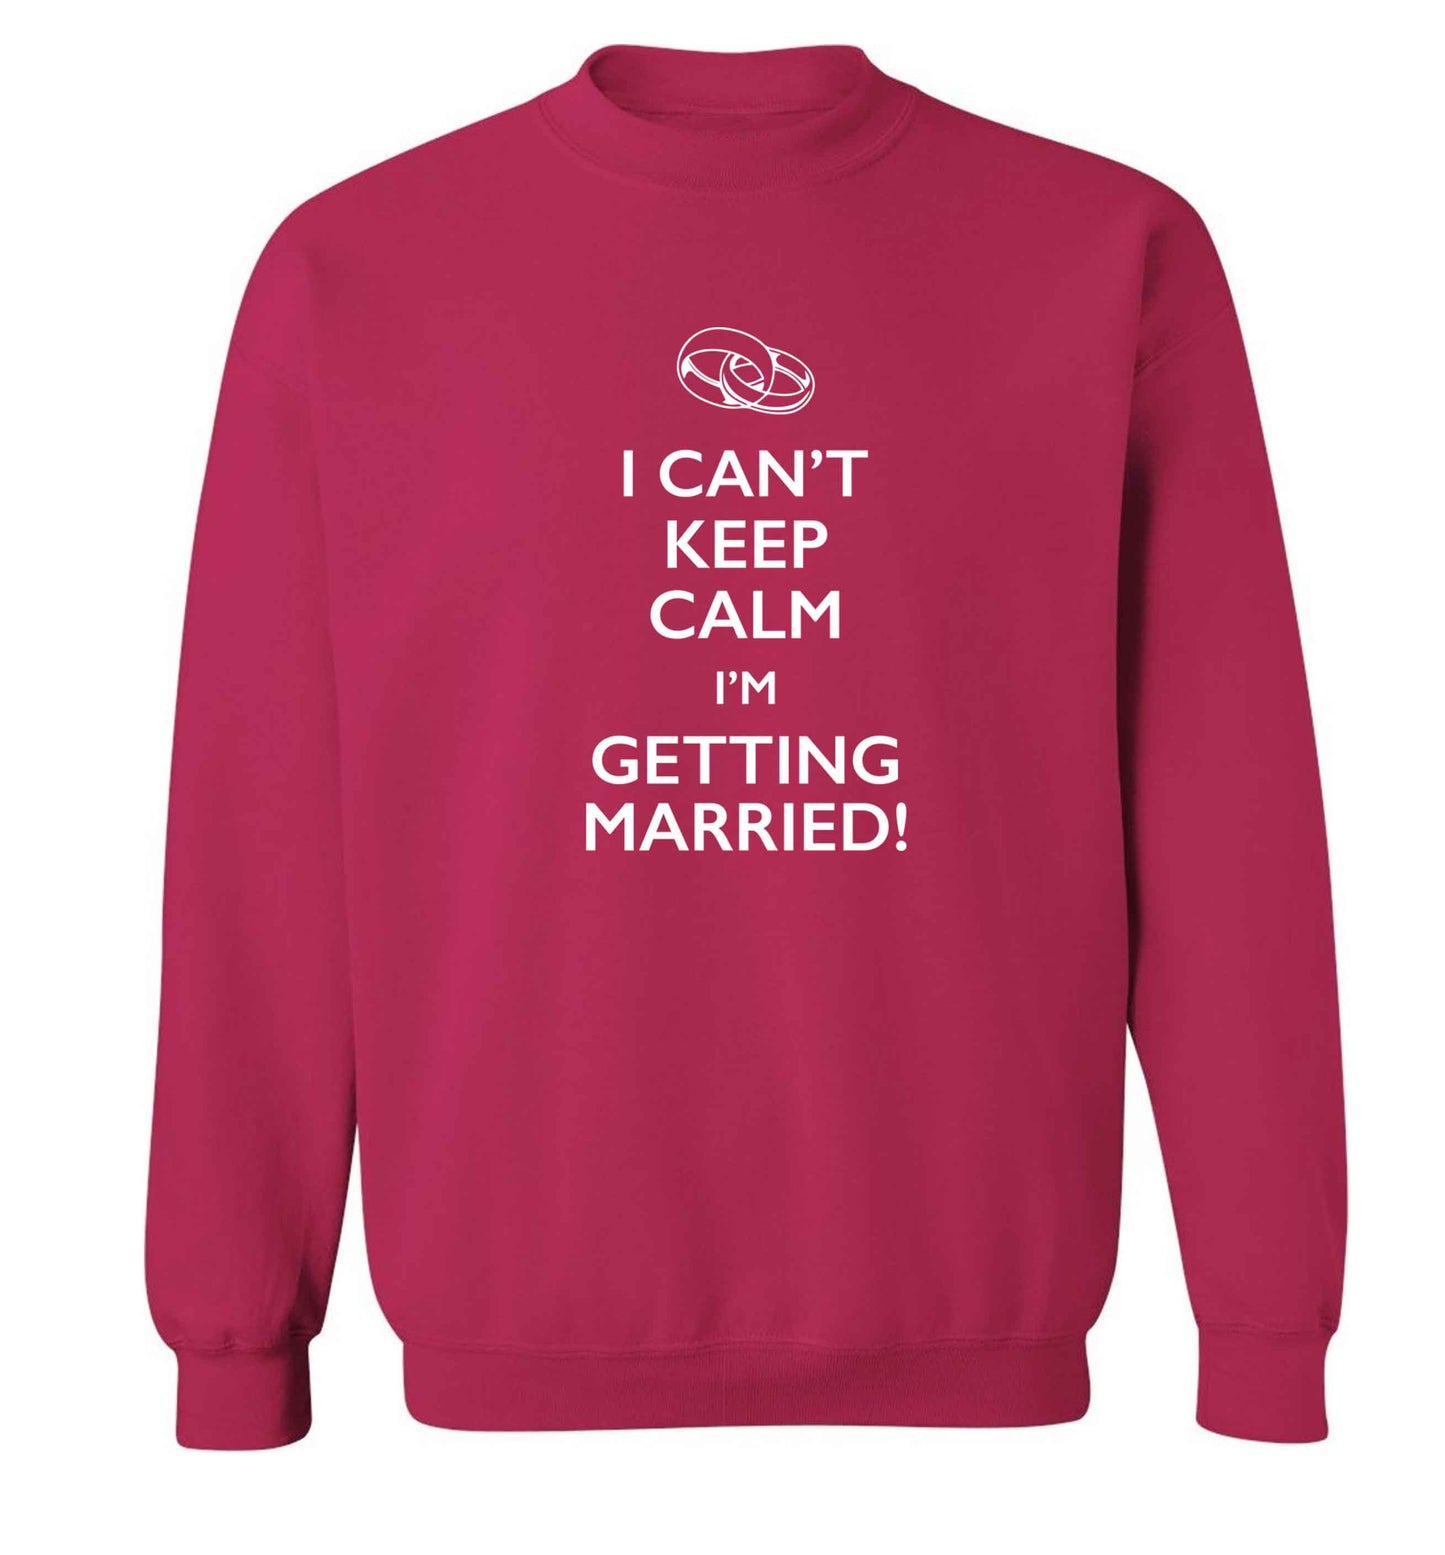 I can't keep calm I'm getting married! adult's unisex pink sweater 2XL